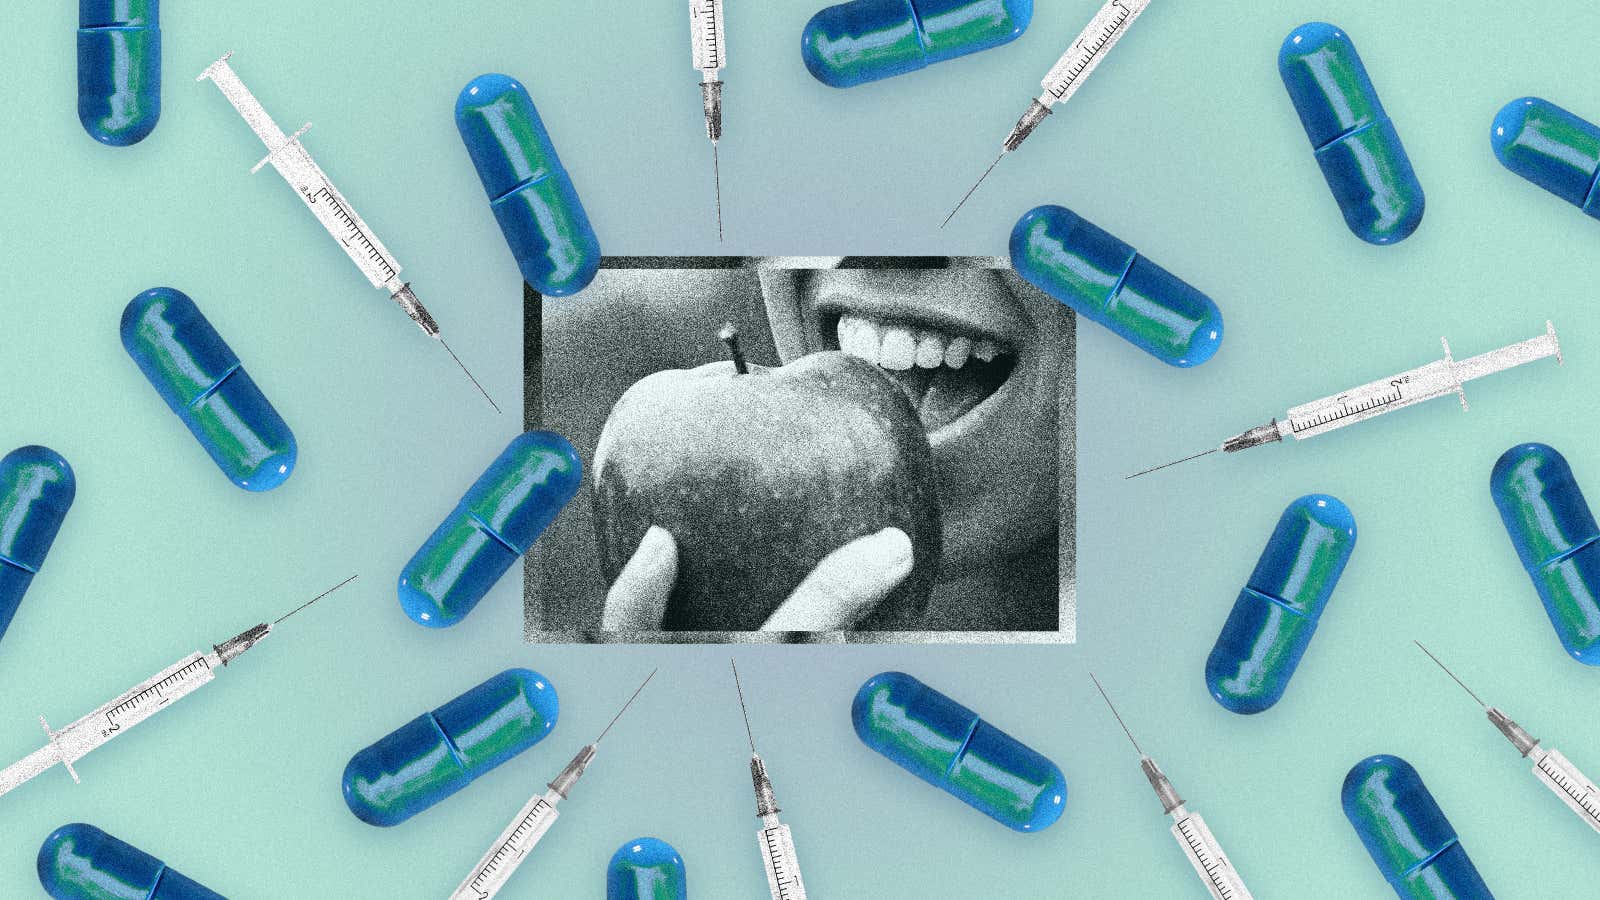 A new generation of weight loss drugs makes bold promises, but who really wins?